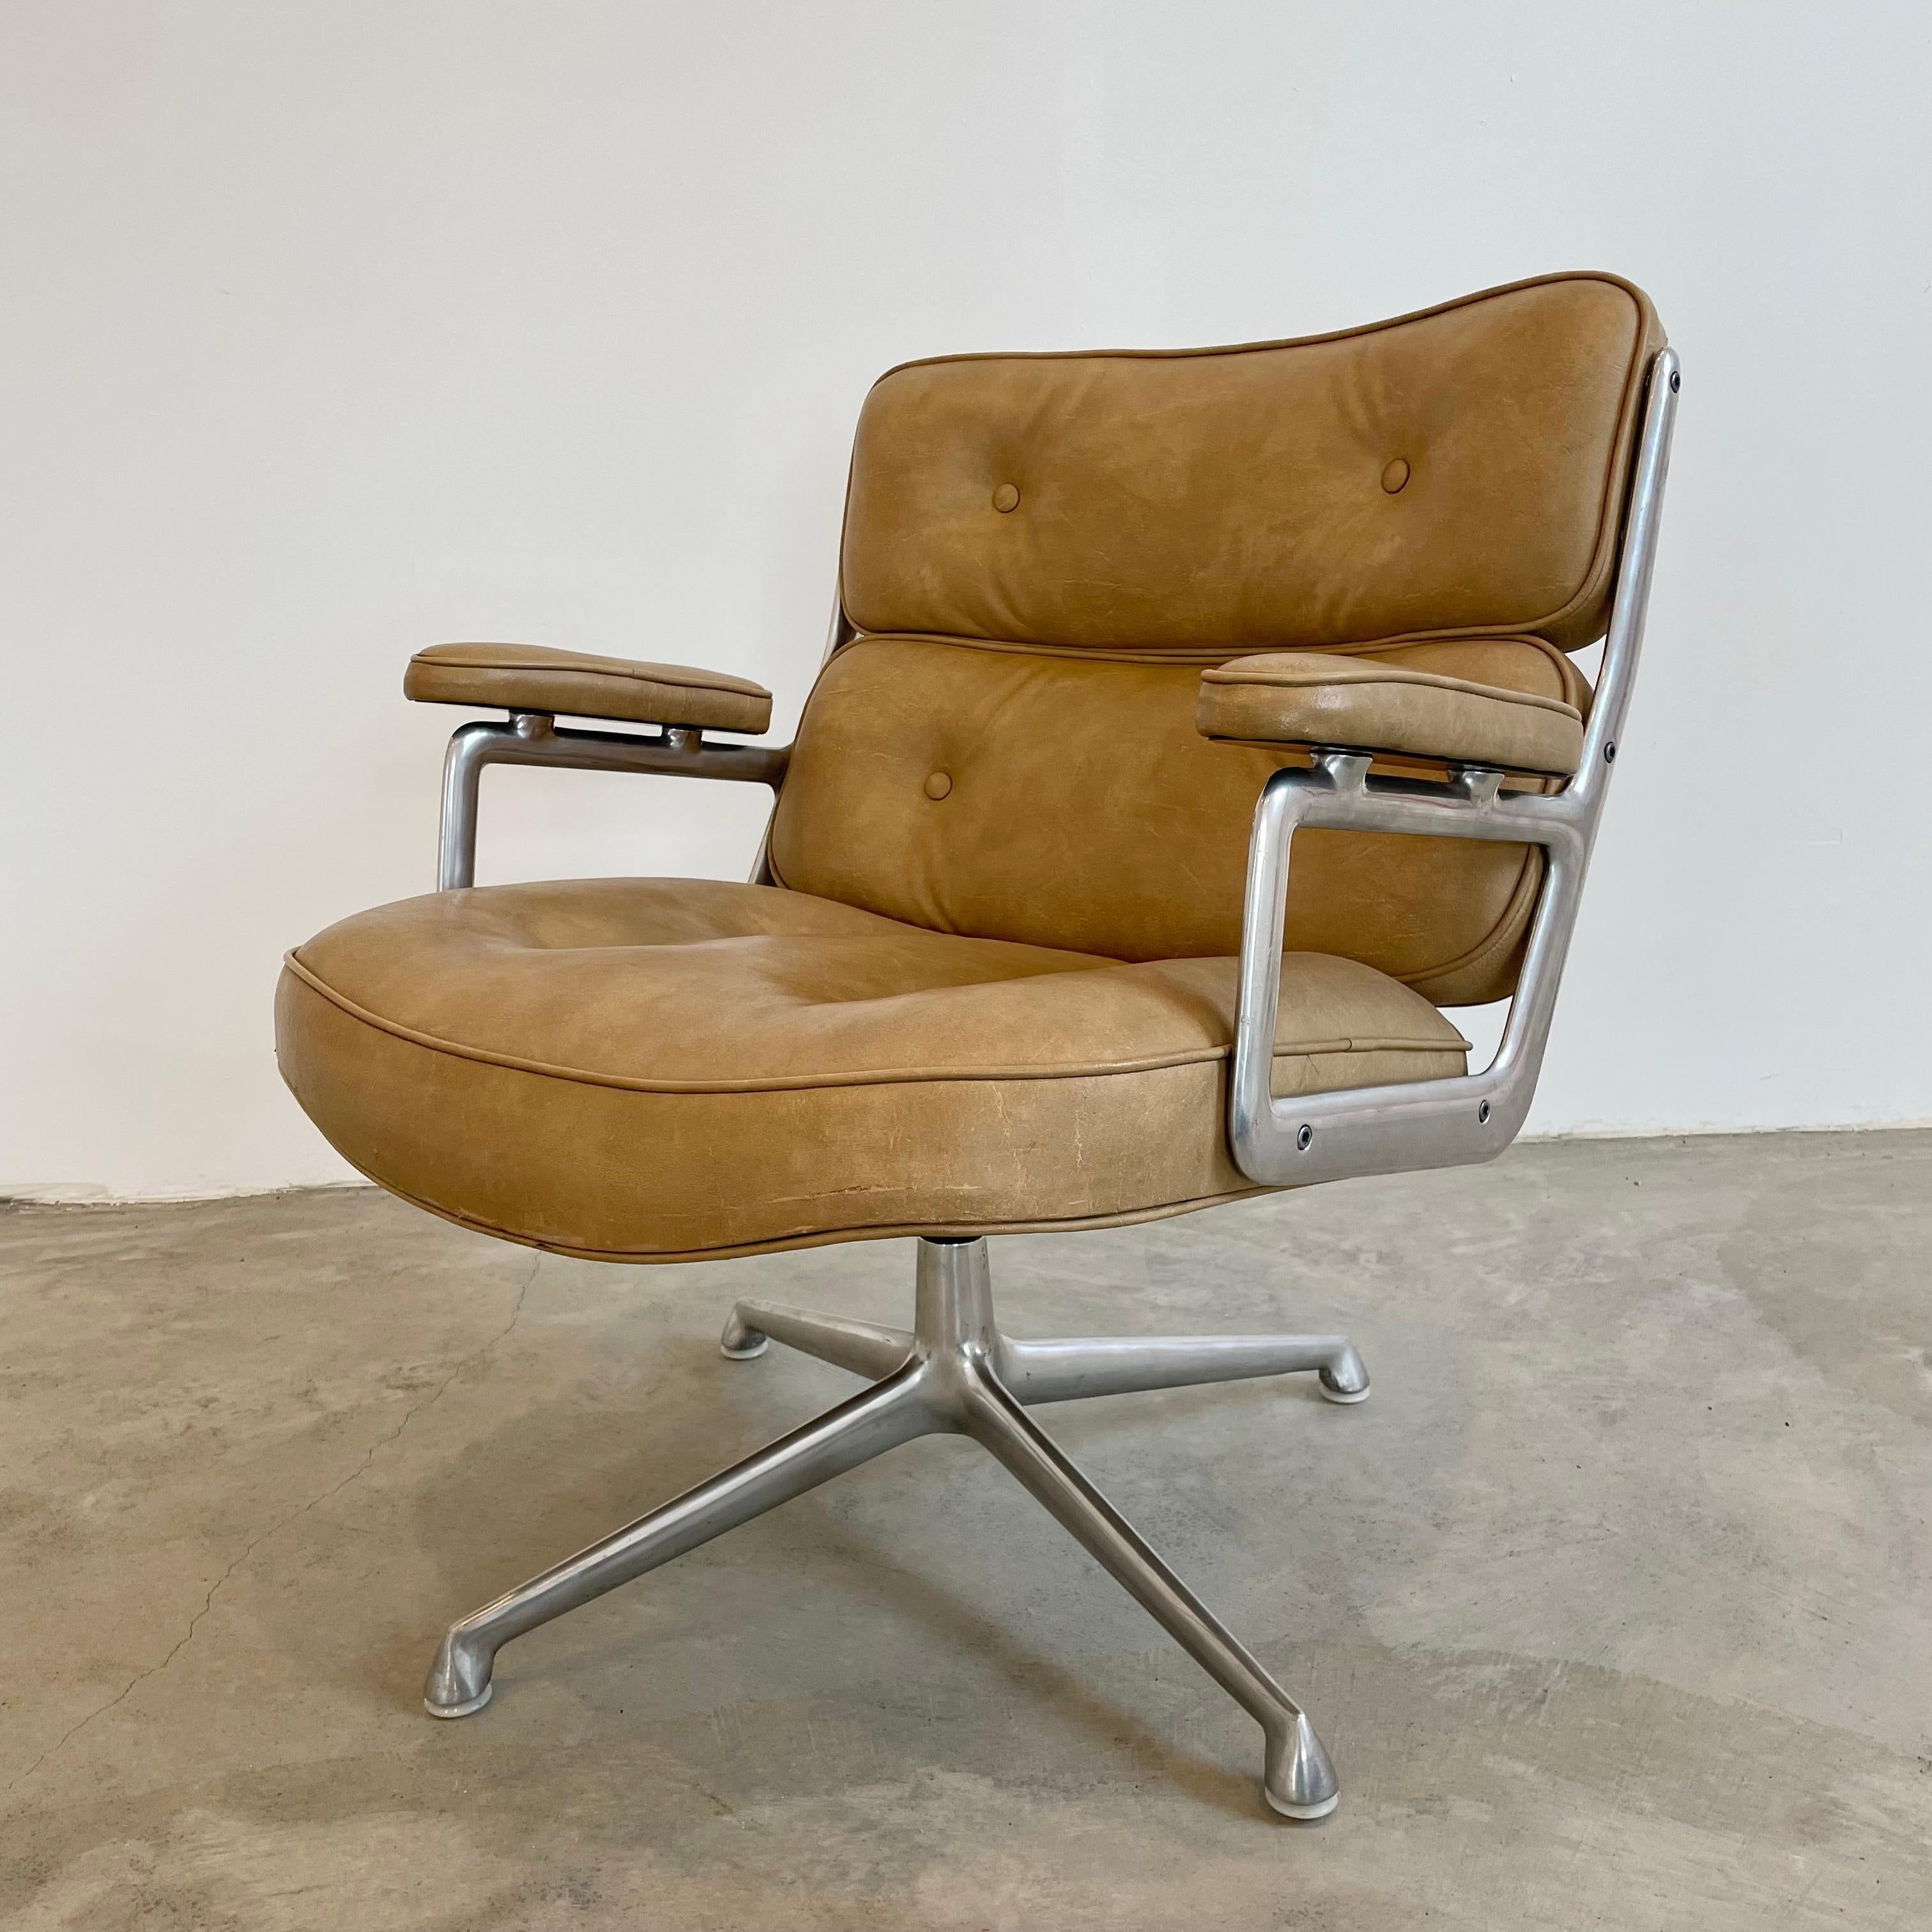 Late 20th Century Vintage Eames Time Life Lobby Chair in Camel